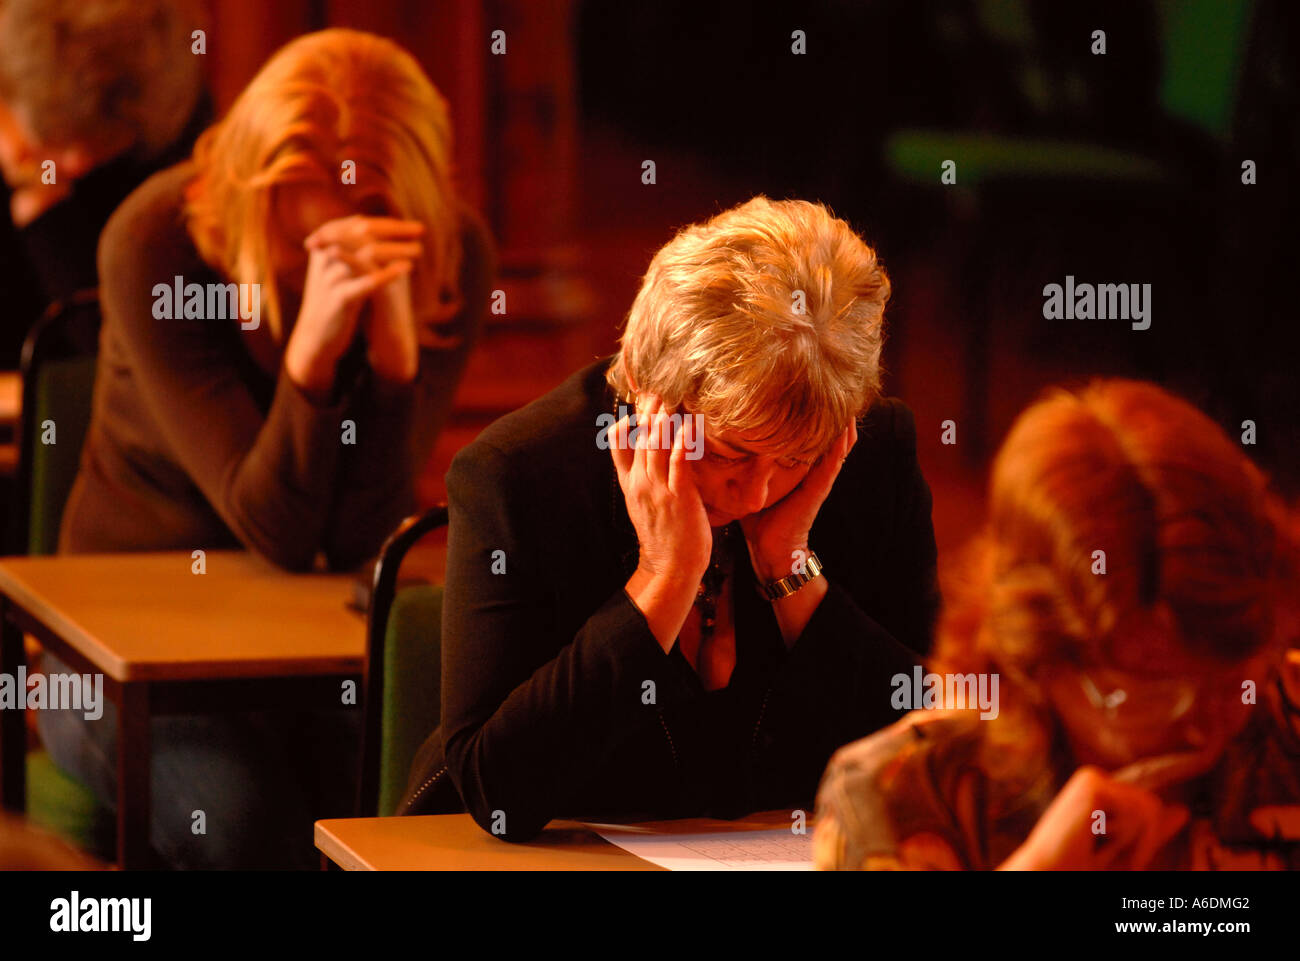 A COMPETITOR AT CHELTENHAM LADIES COLLEGE FOR THE TIMES LITERARY FESTIVAL SU DOKU CHAMPIONSHIPS OCT 2005 Stock Photo